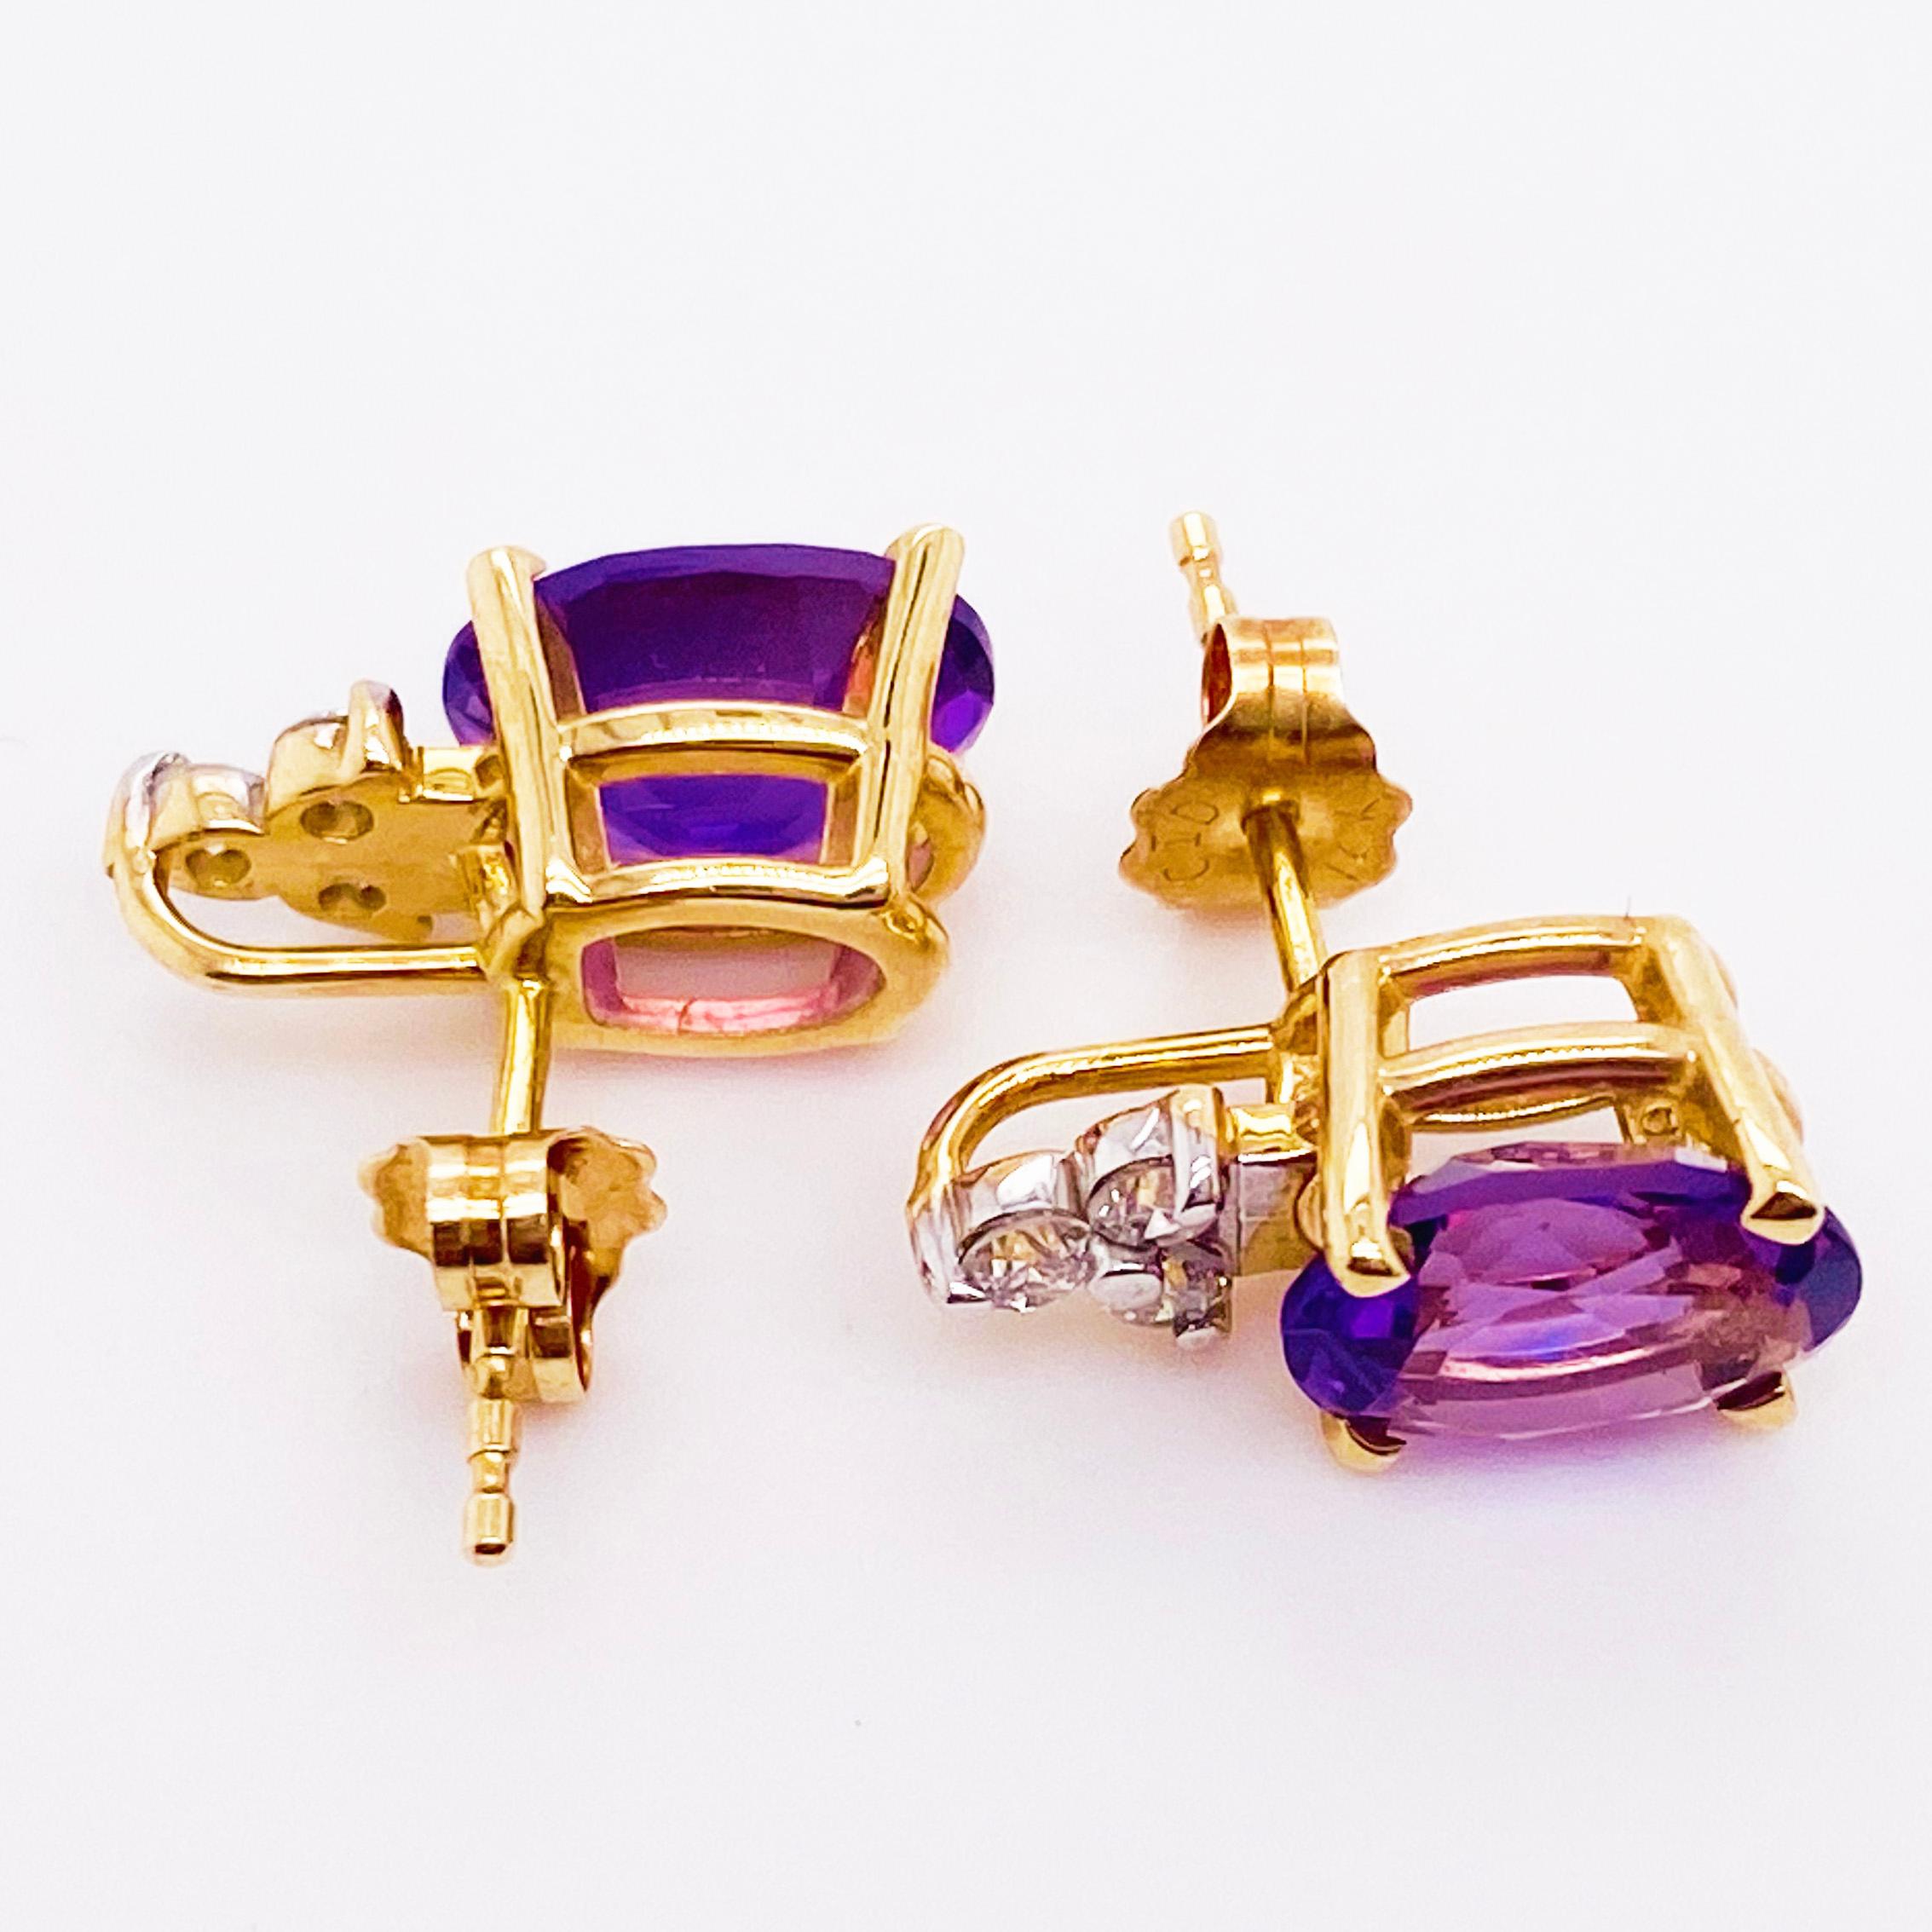 Oval Cut Oval Amethyst and Diamond Cluster Earring Studs 14 Karat Yellow Gold, February